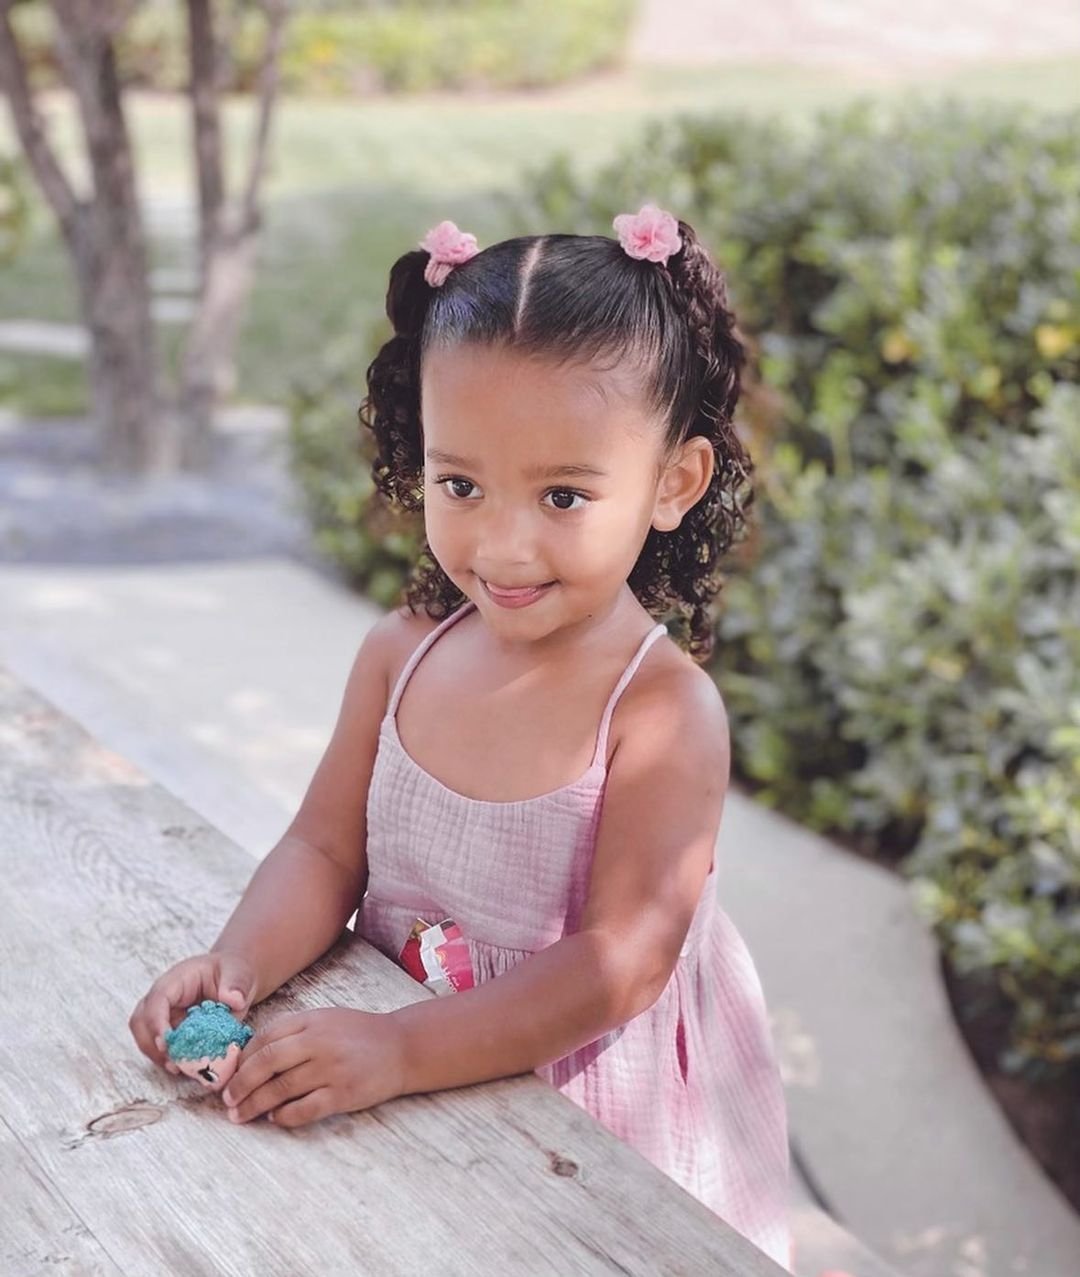 Celebrate Chicago West S 2nd Birthday By Looking At Her Cutest Pics E Online